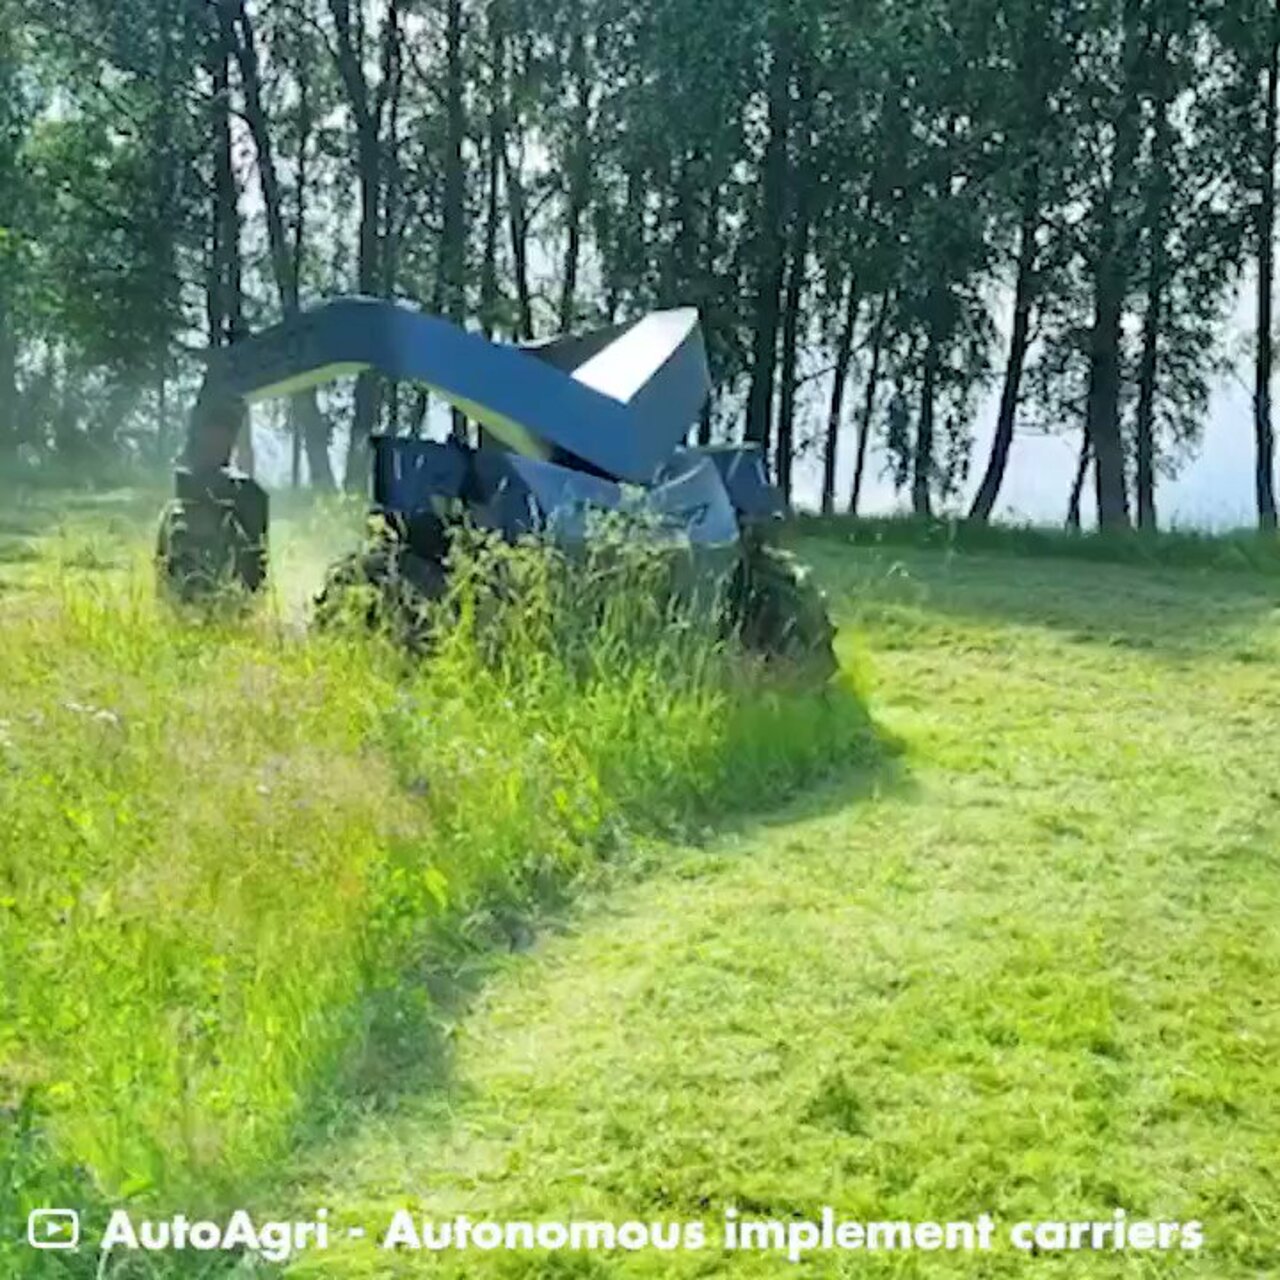 This #Robot can do numerous things like spraying, plowing, fork lifting, and mowing by @gigadgets_ #AI #ArtificialIntelligence #AgriTech #Robotics #Innovation #TechForGood #Technology cc: @wil_bielert @patrickgunz_ch @johnlegere https://t.co/85YEctqKho